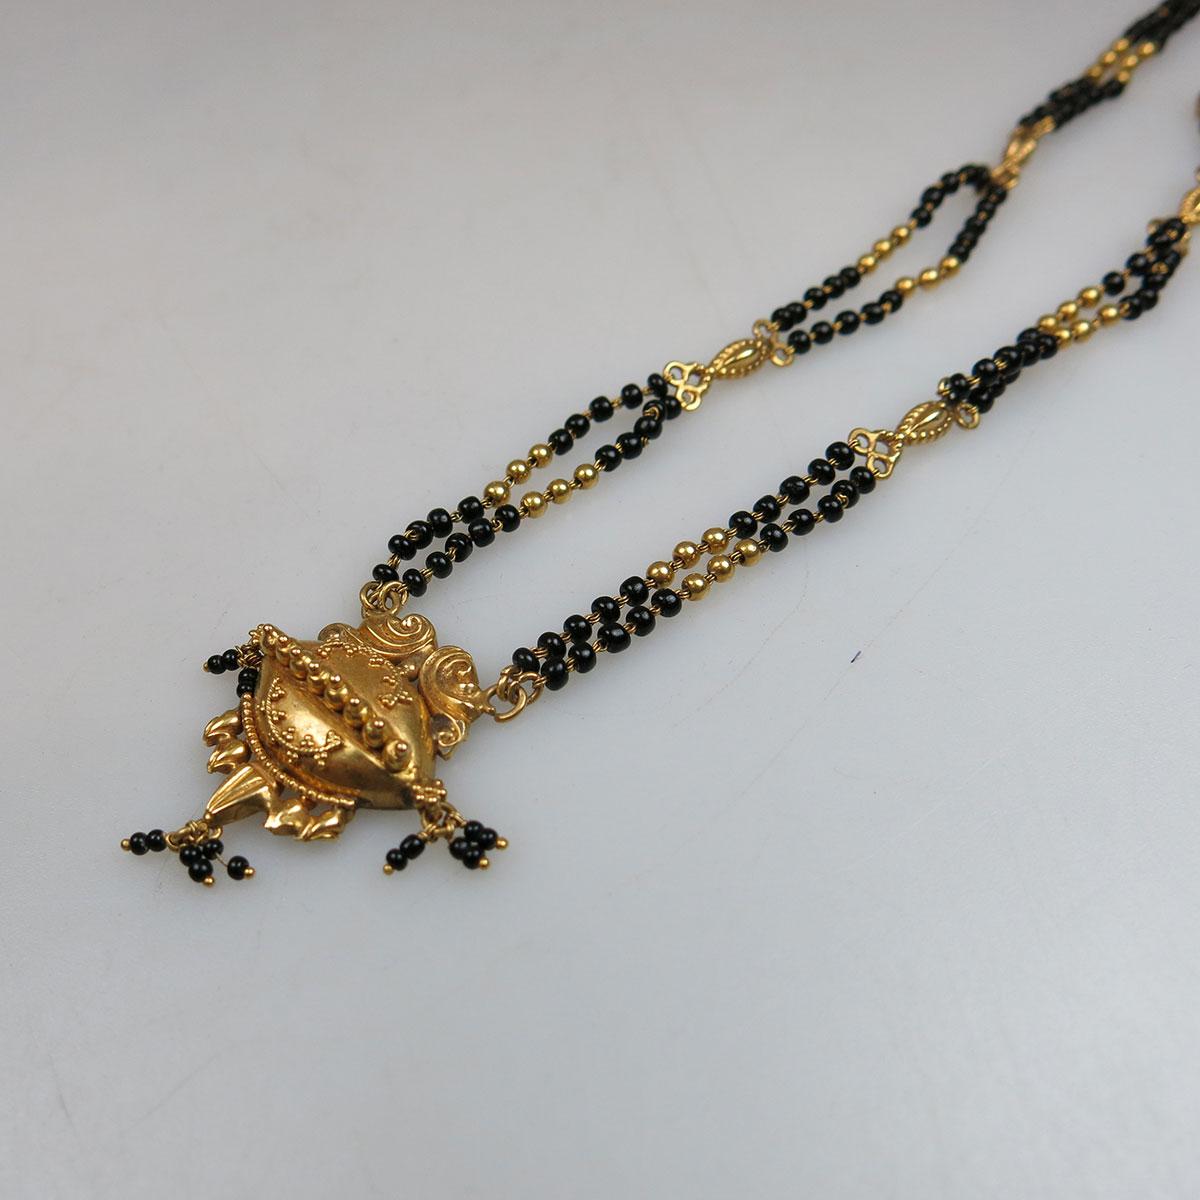 22k Yellow Gold And Onyx Bead Necklace